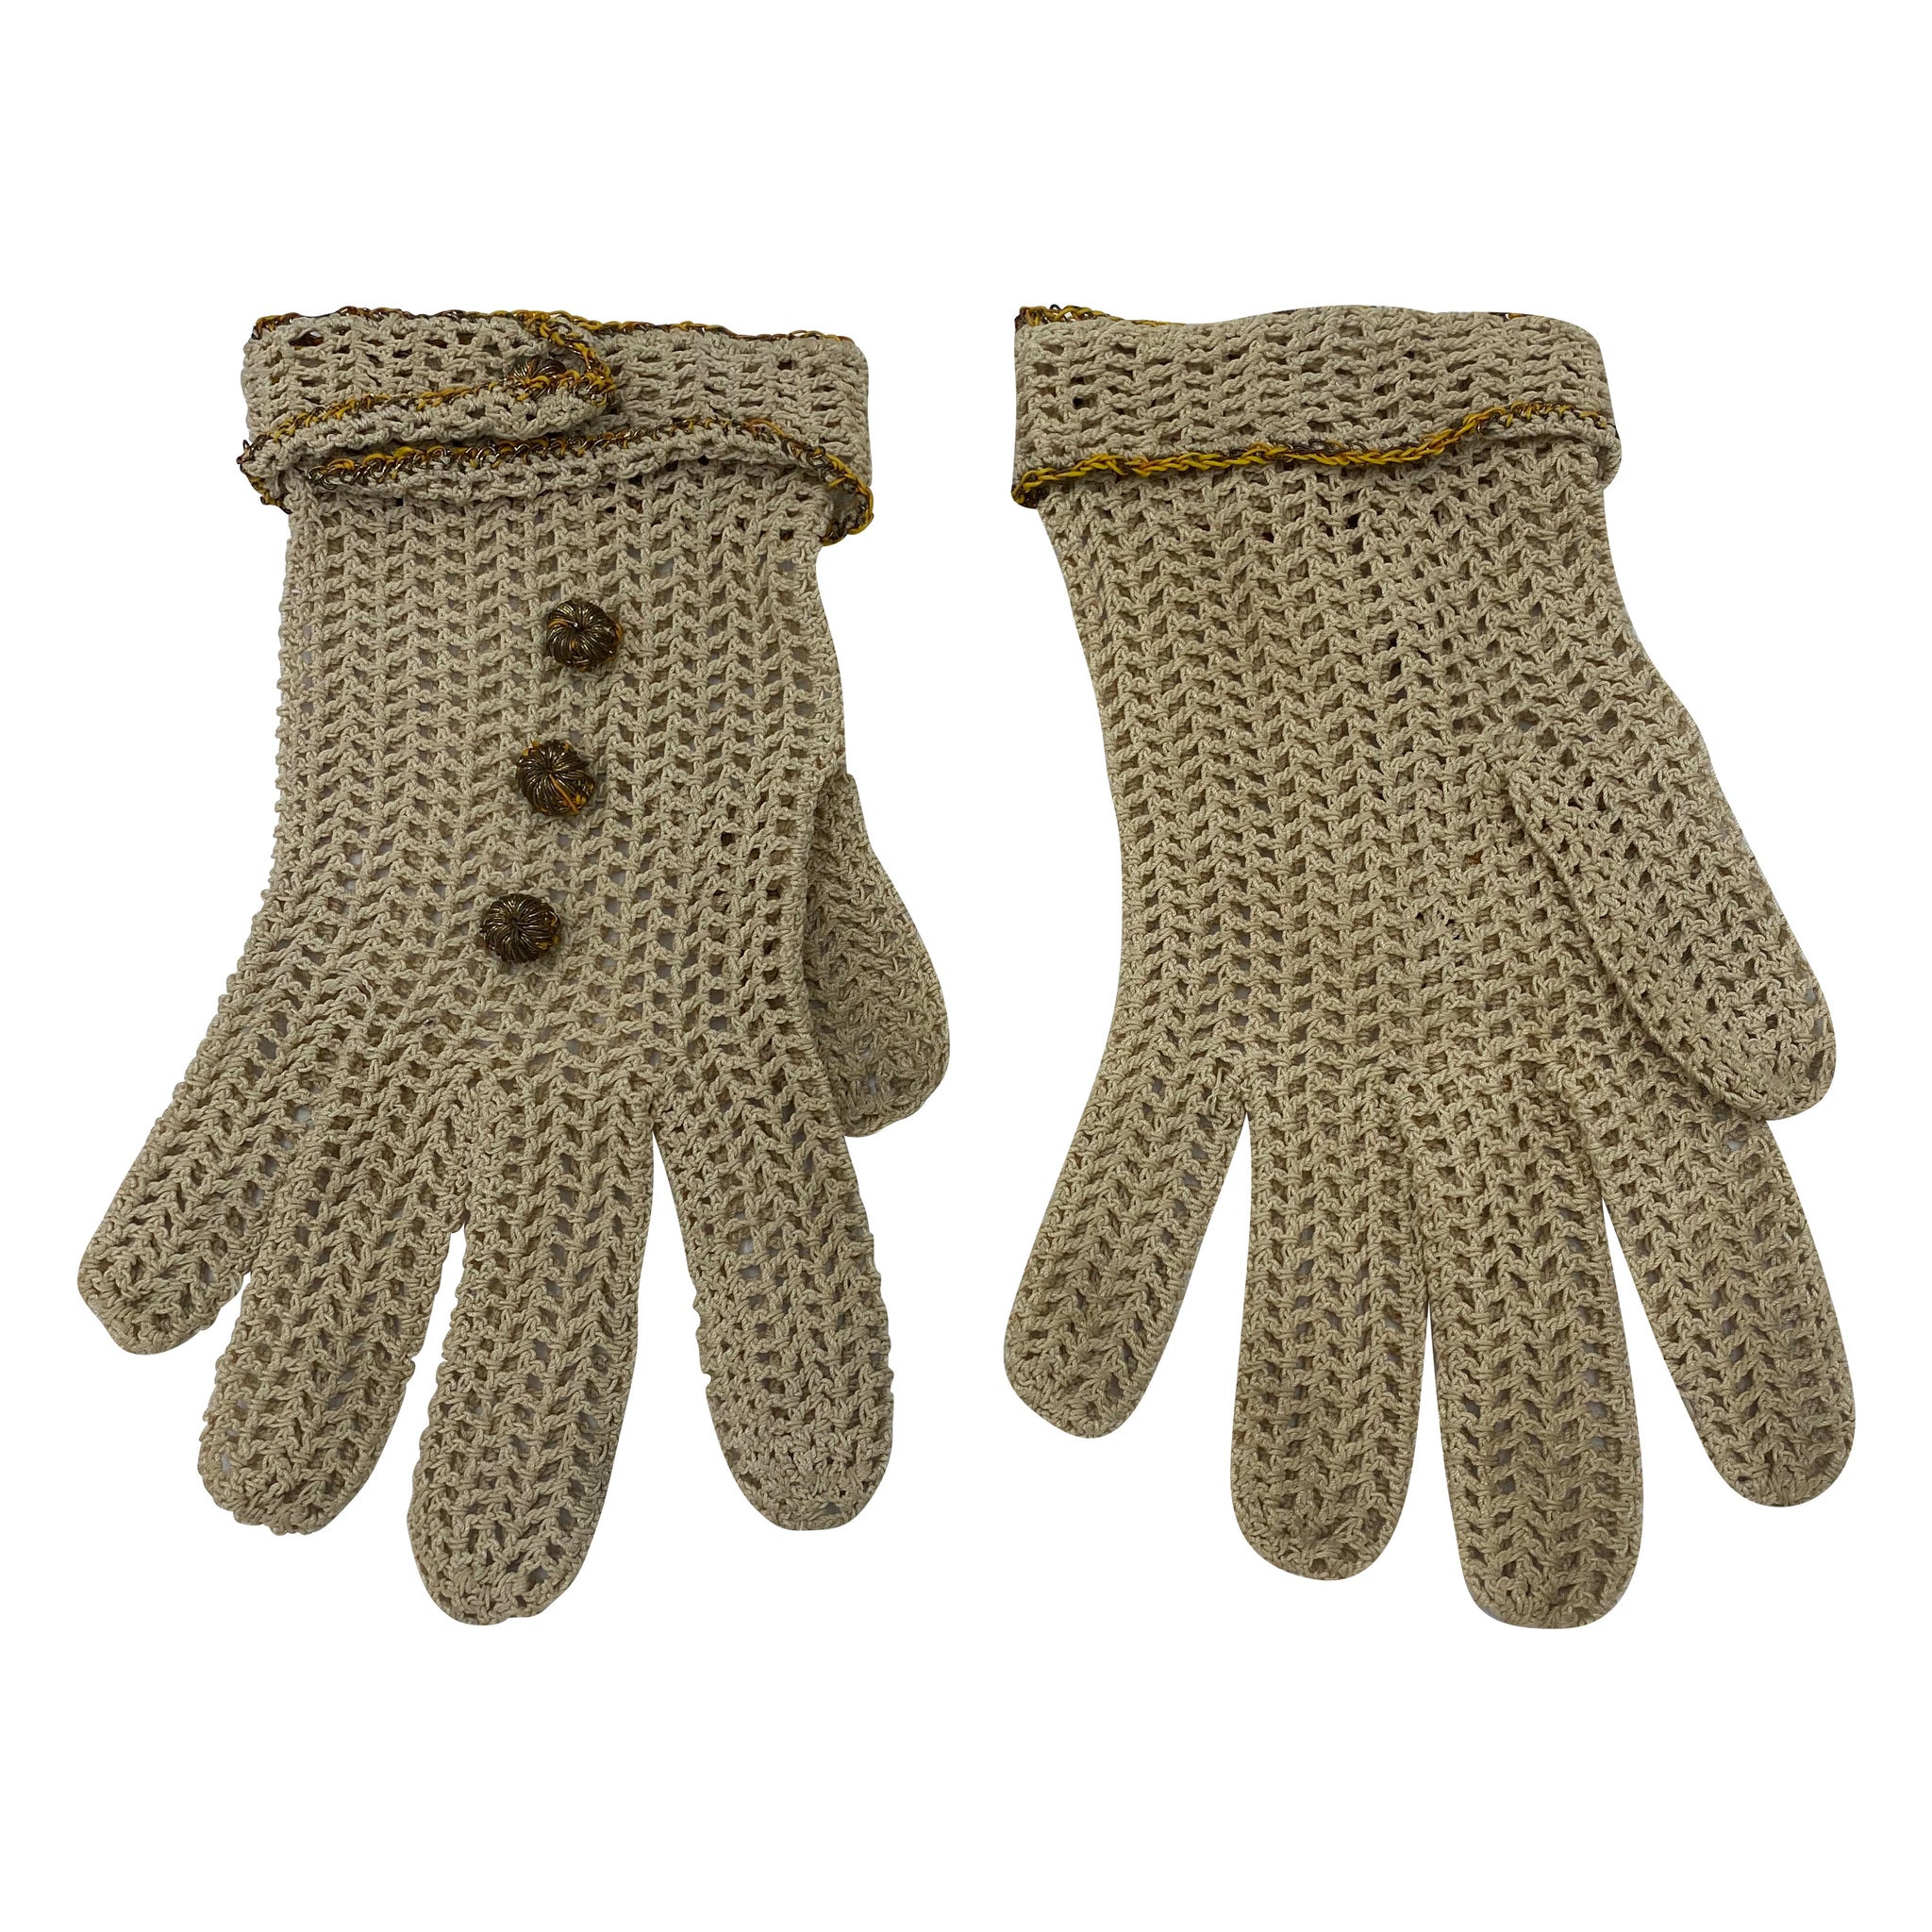 30s Gloves Tan Crochet with Bullion Buttons  BACK 2 of 2